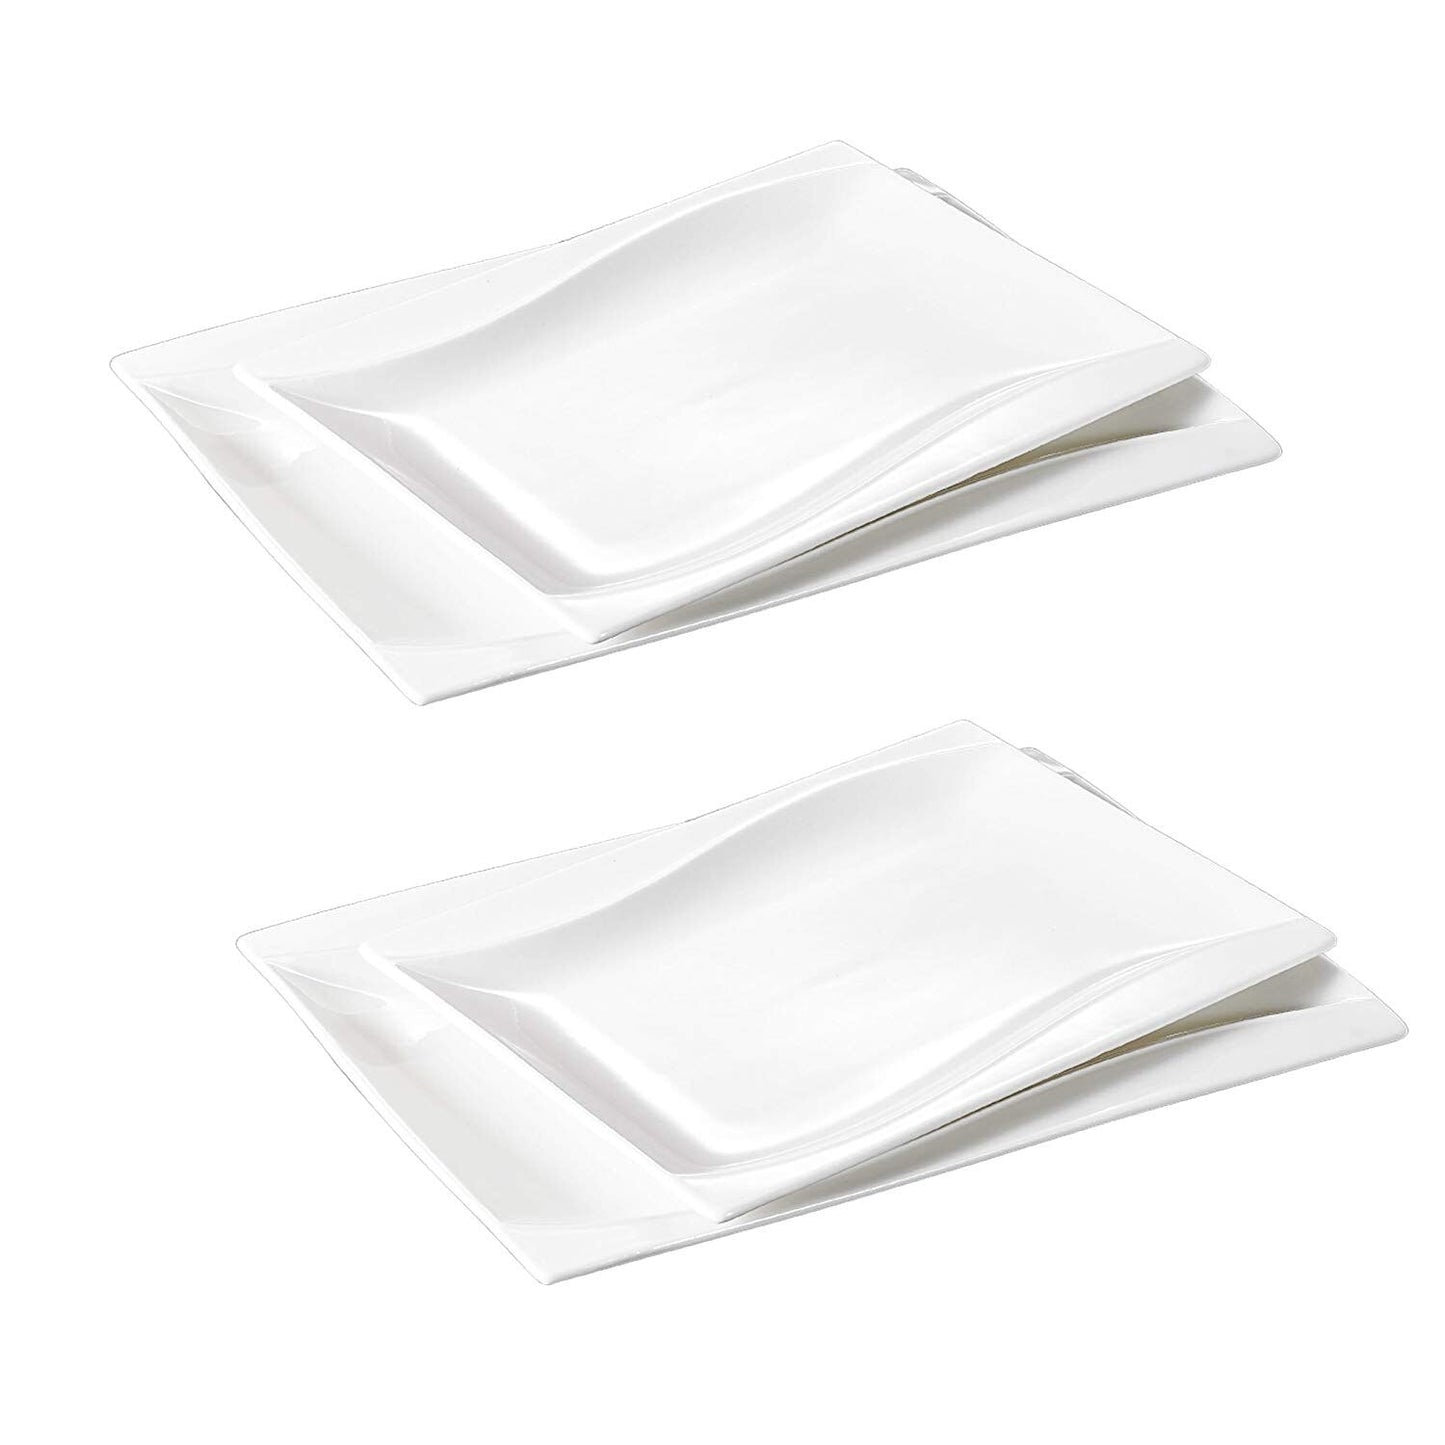 Carina 4-Piece Ivory White Porcelain Dinner Plate Set with 11" & 13.25" Rectangular Plates - Nordic Side - 11, 1325, Carina, Dinner, Dishes, Fruit, Ivory, MALACASA, Piece, Plate, Platters, Po